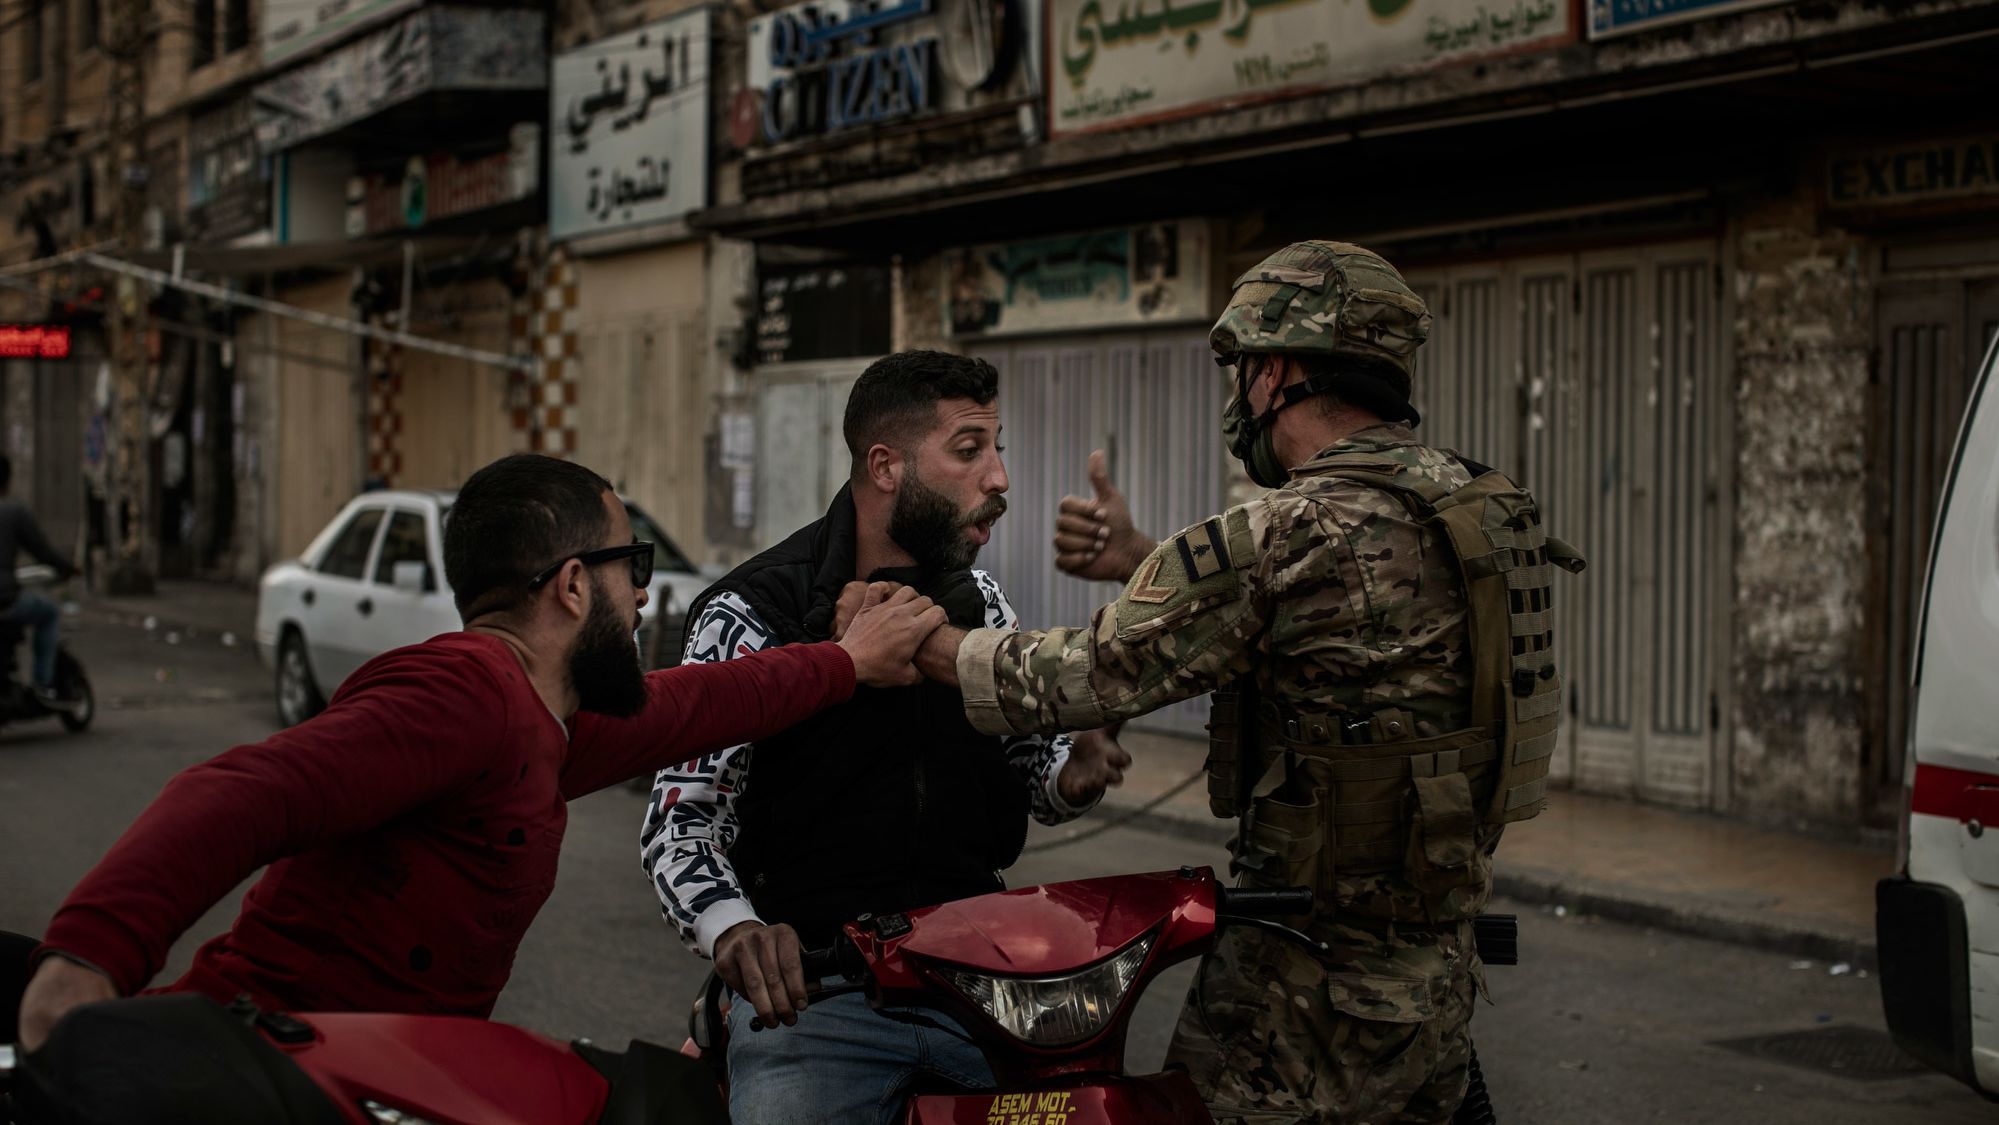 A soldier stops a man on a motorcycle during Tuesday's clashes.